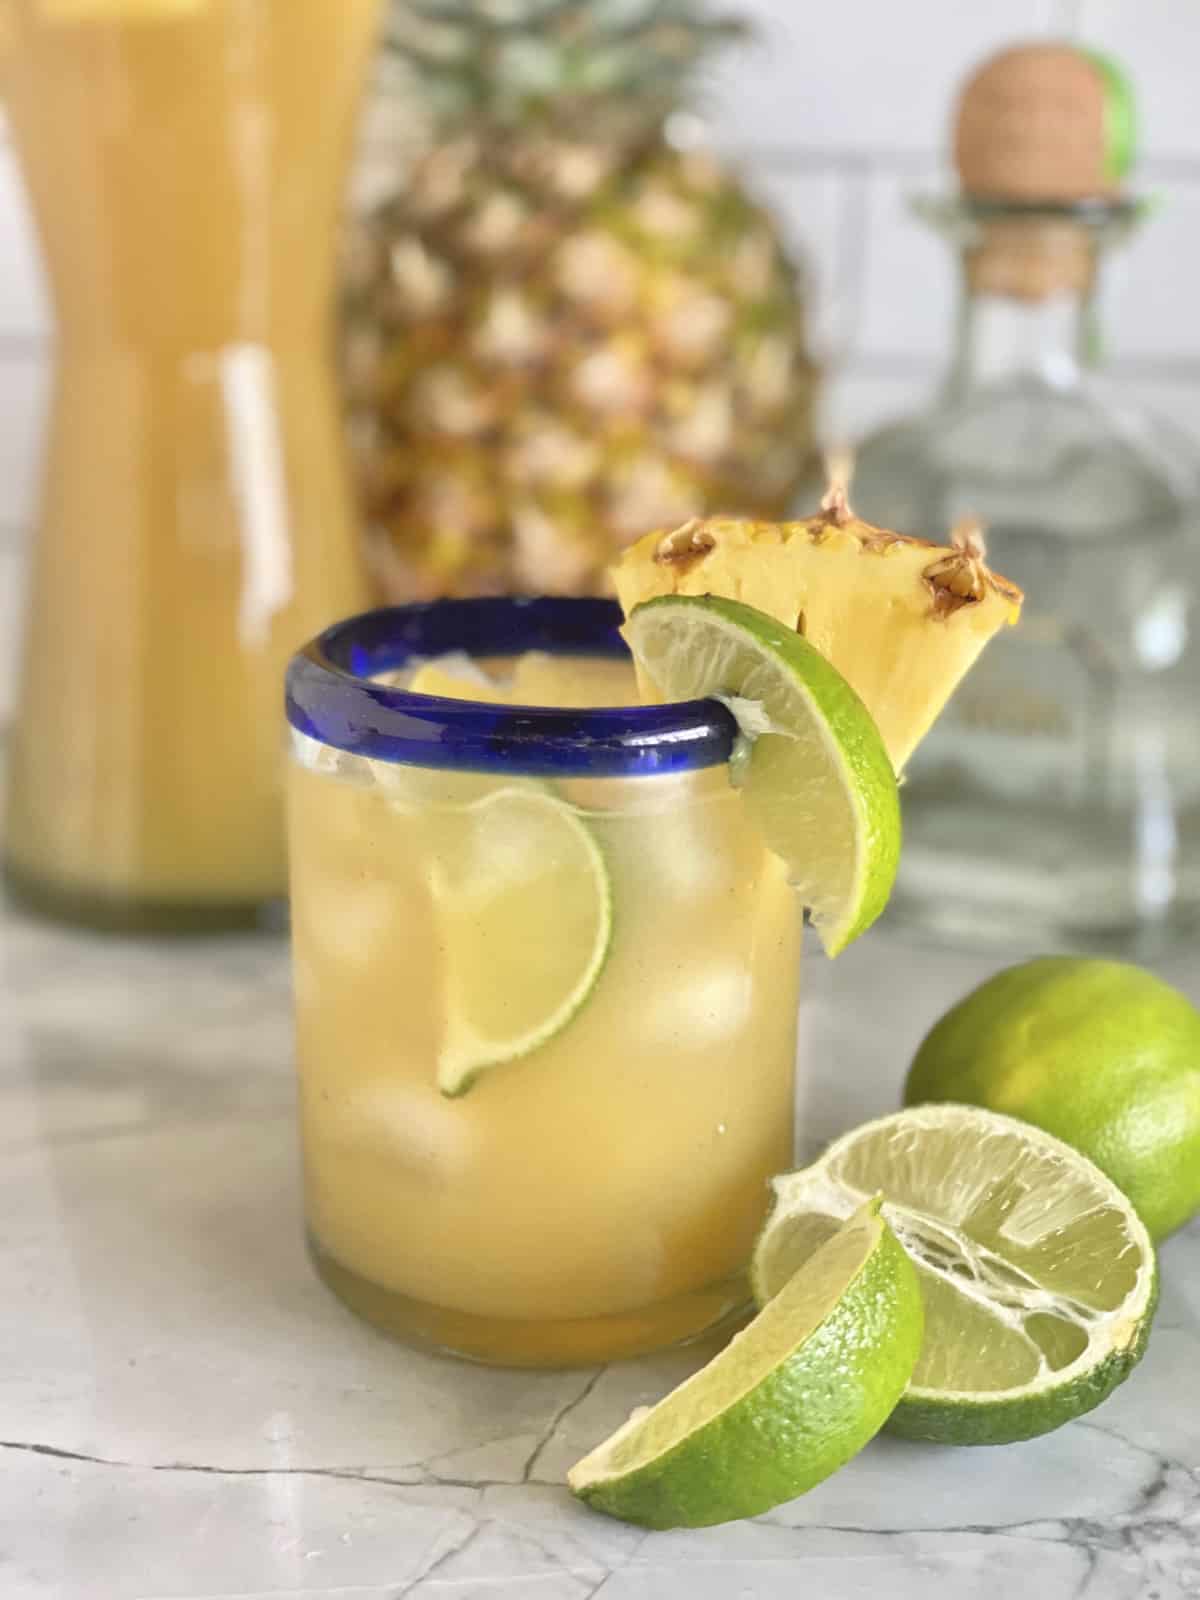 Glass with yellow drink with blue rim garnished with lime and pineapple chunk.